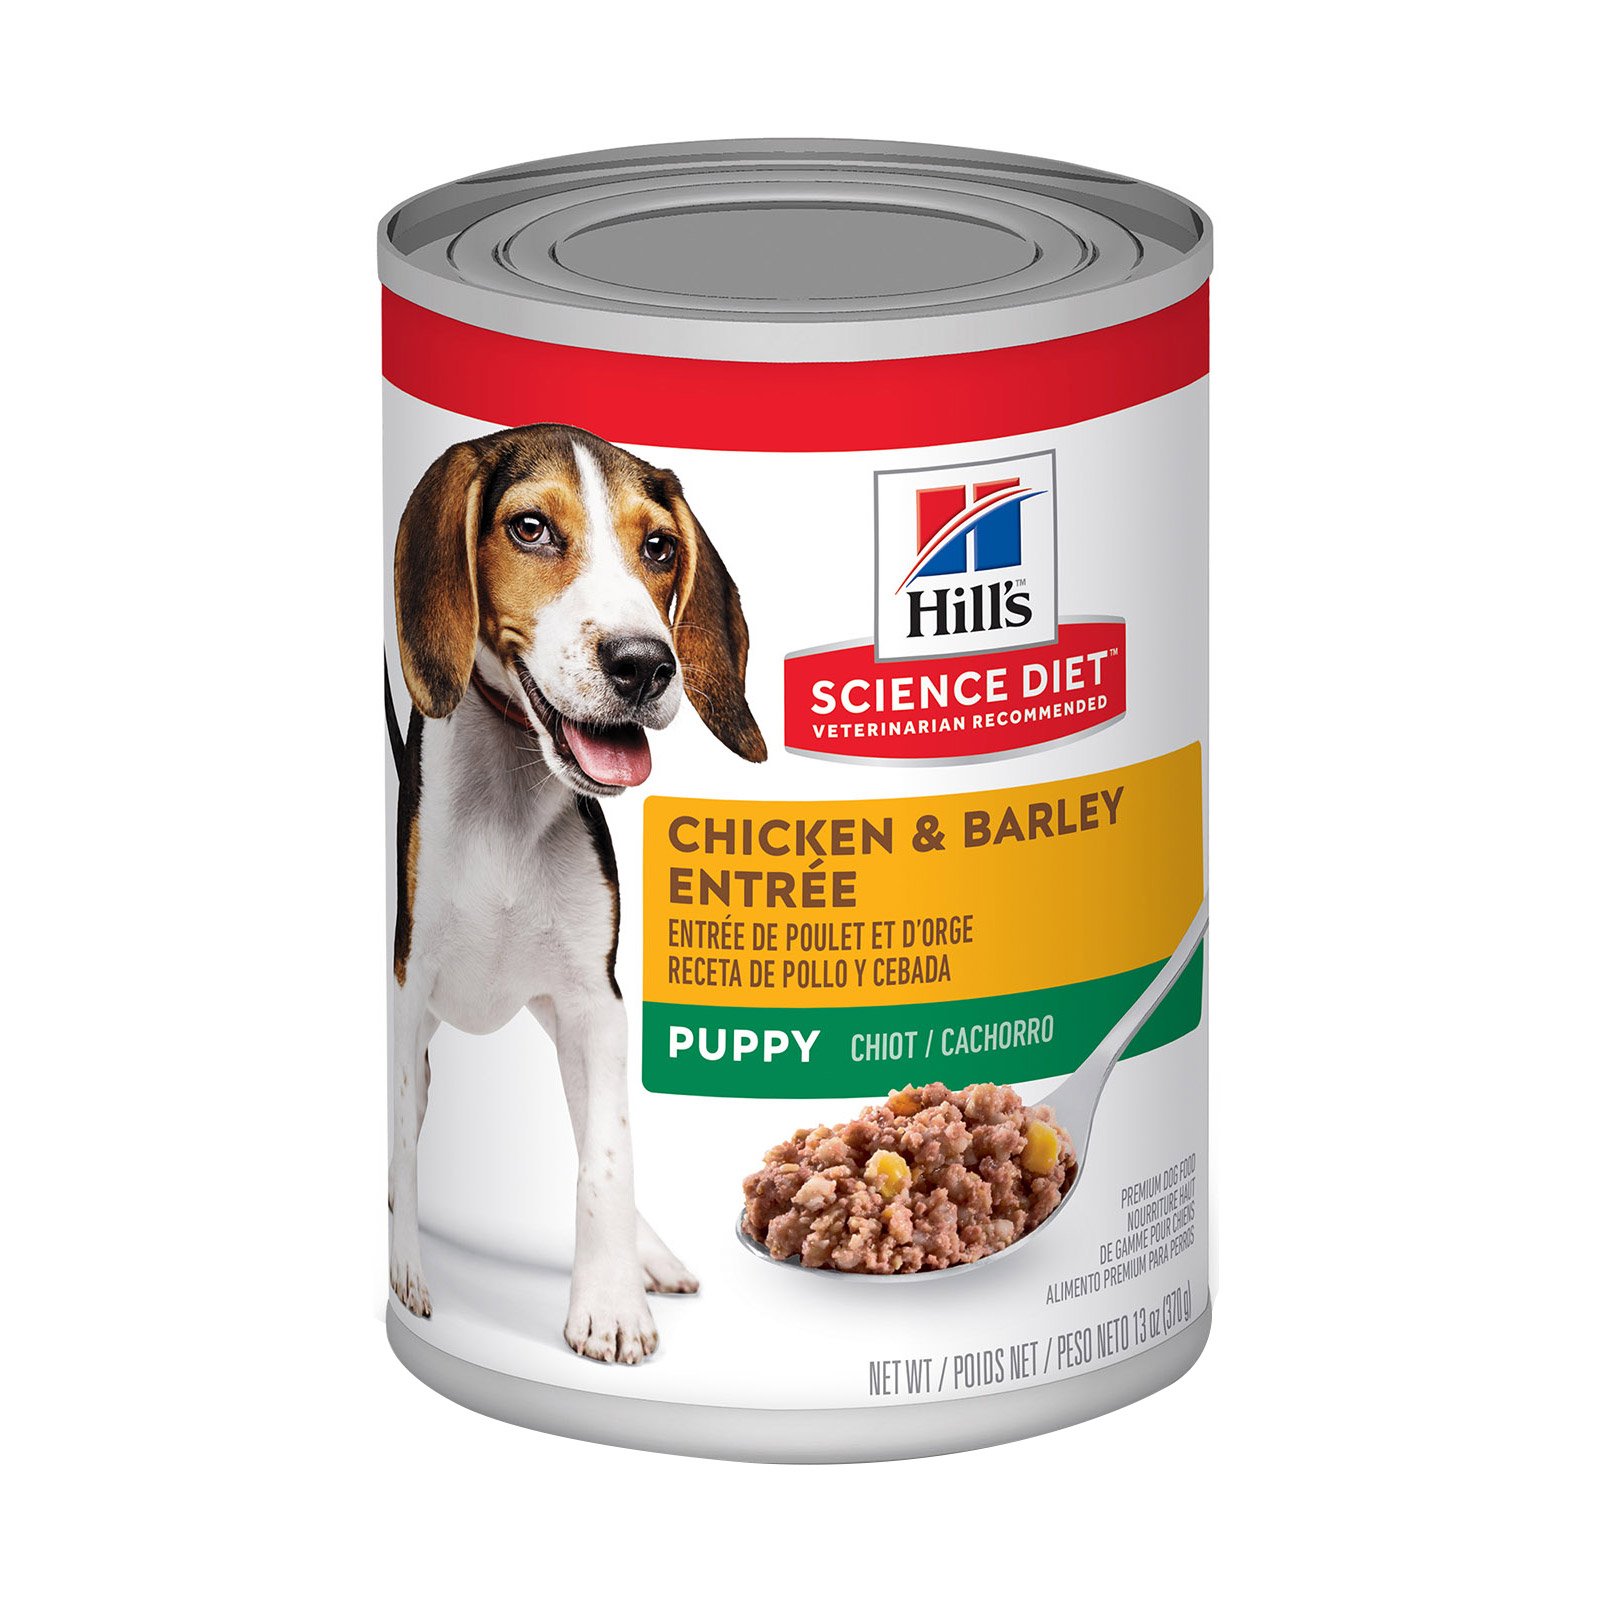 Hill's Science Diet Puppy Chicken & Barley Entrée Canned Dog Food